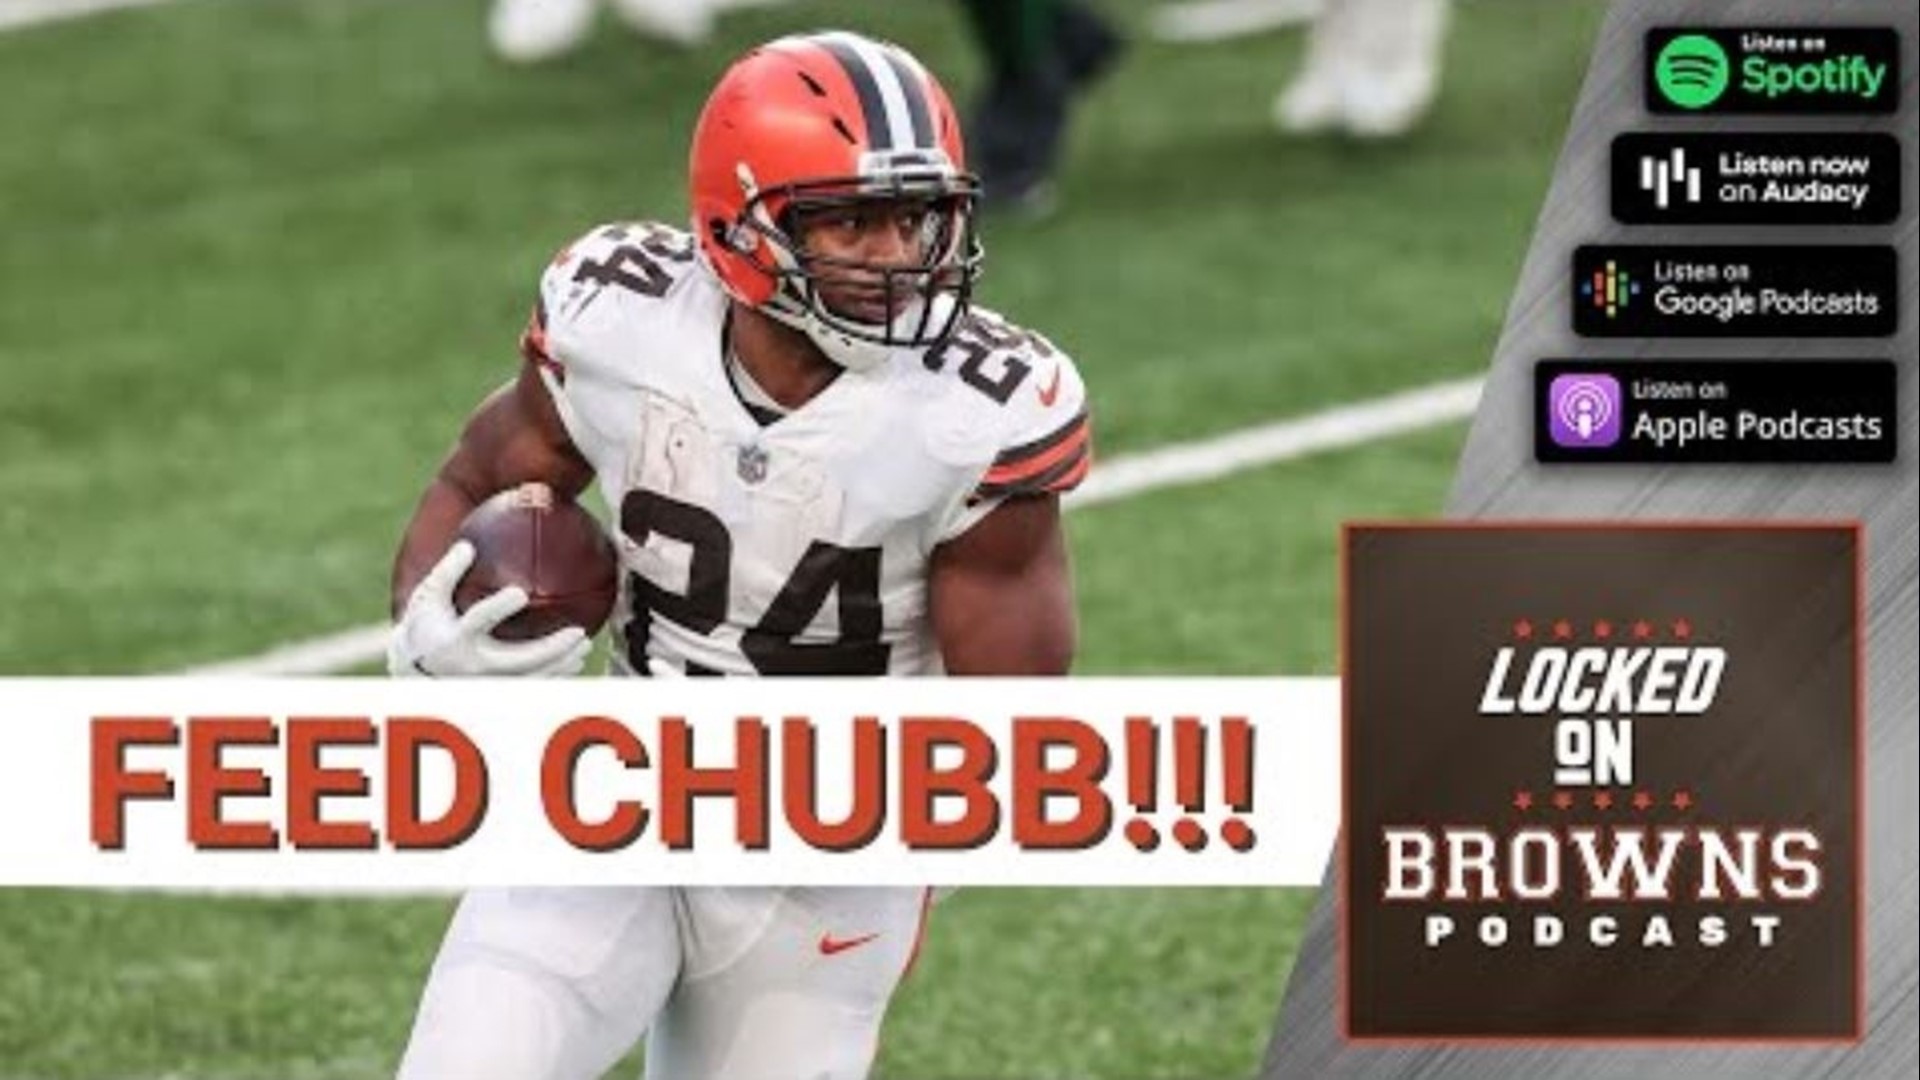 Garrett Bush of the Ultimate Cleveland Sports Show and Jeff Lloyd of Locked on Browns are joined by John Kosko of Pro Football Focus for this conversation.